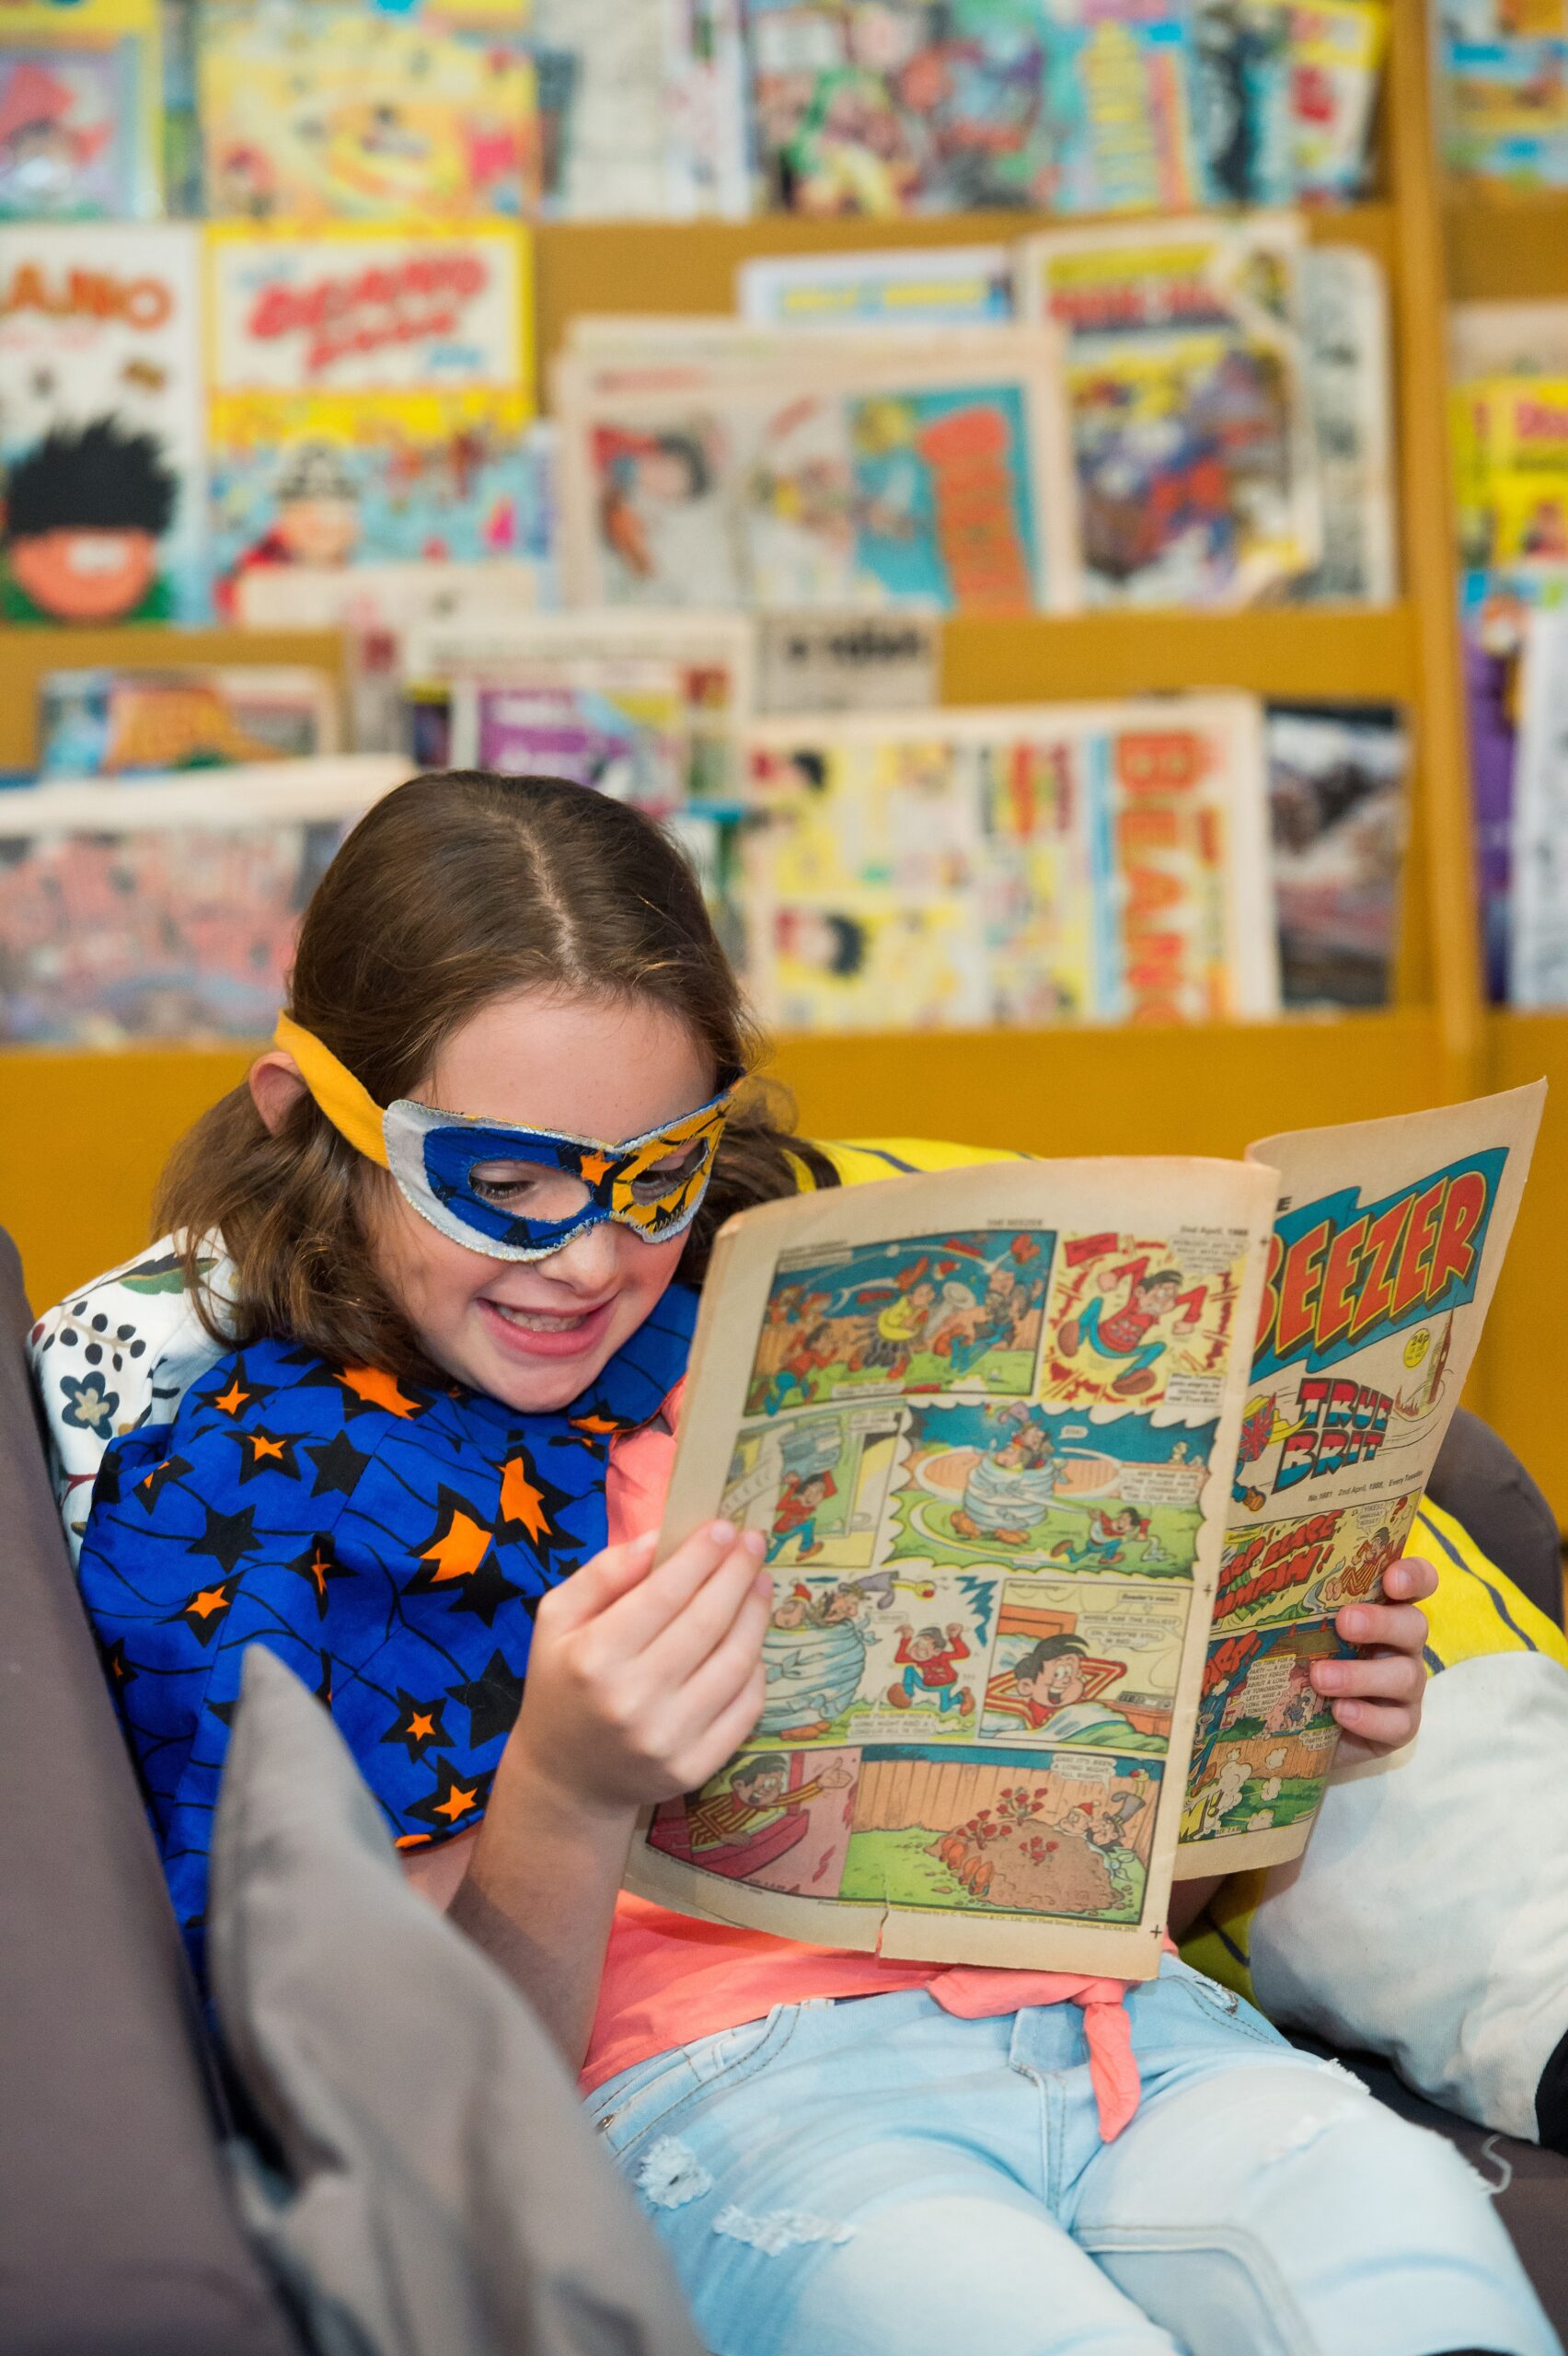 Image of a child reading a comic book.